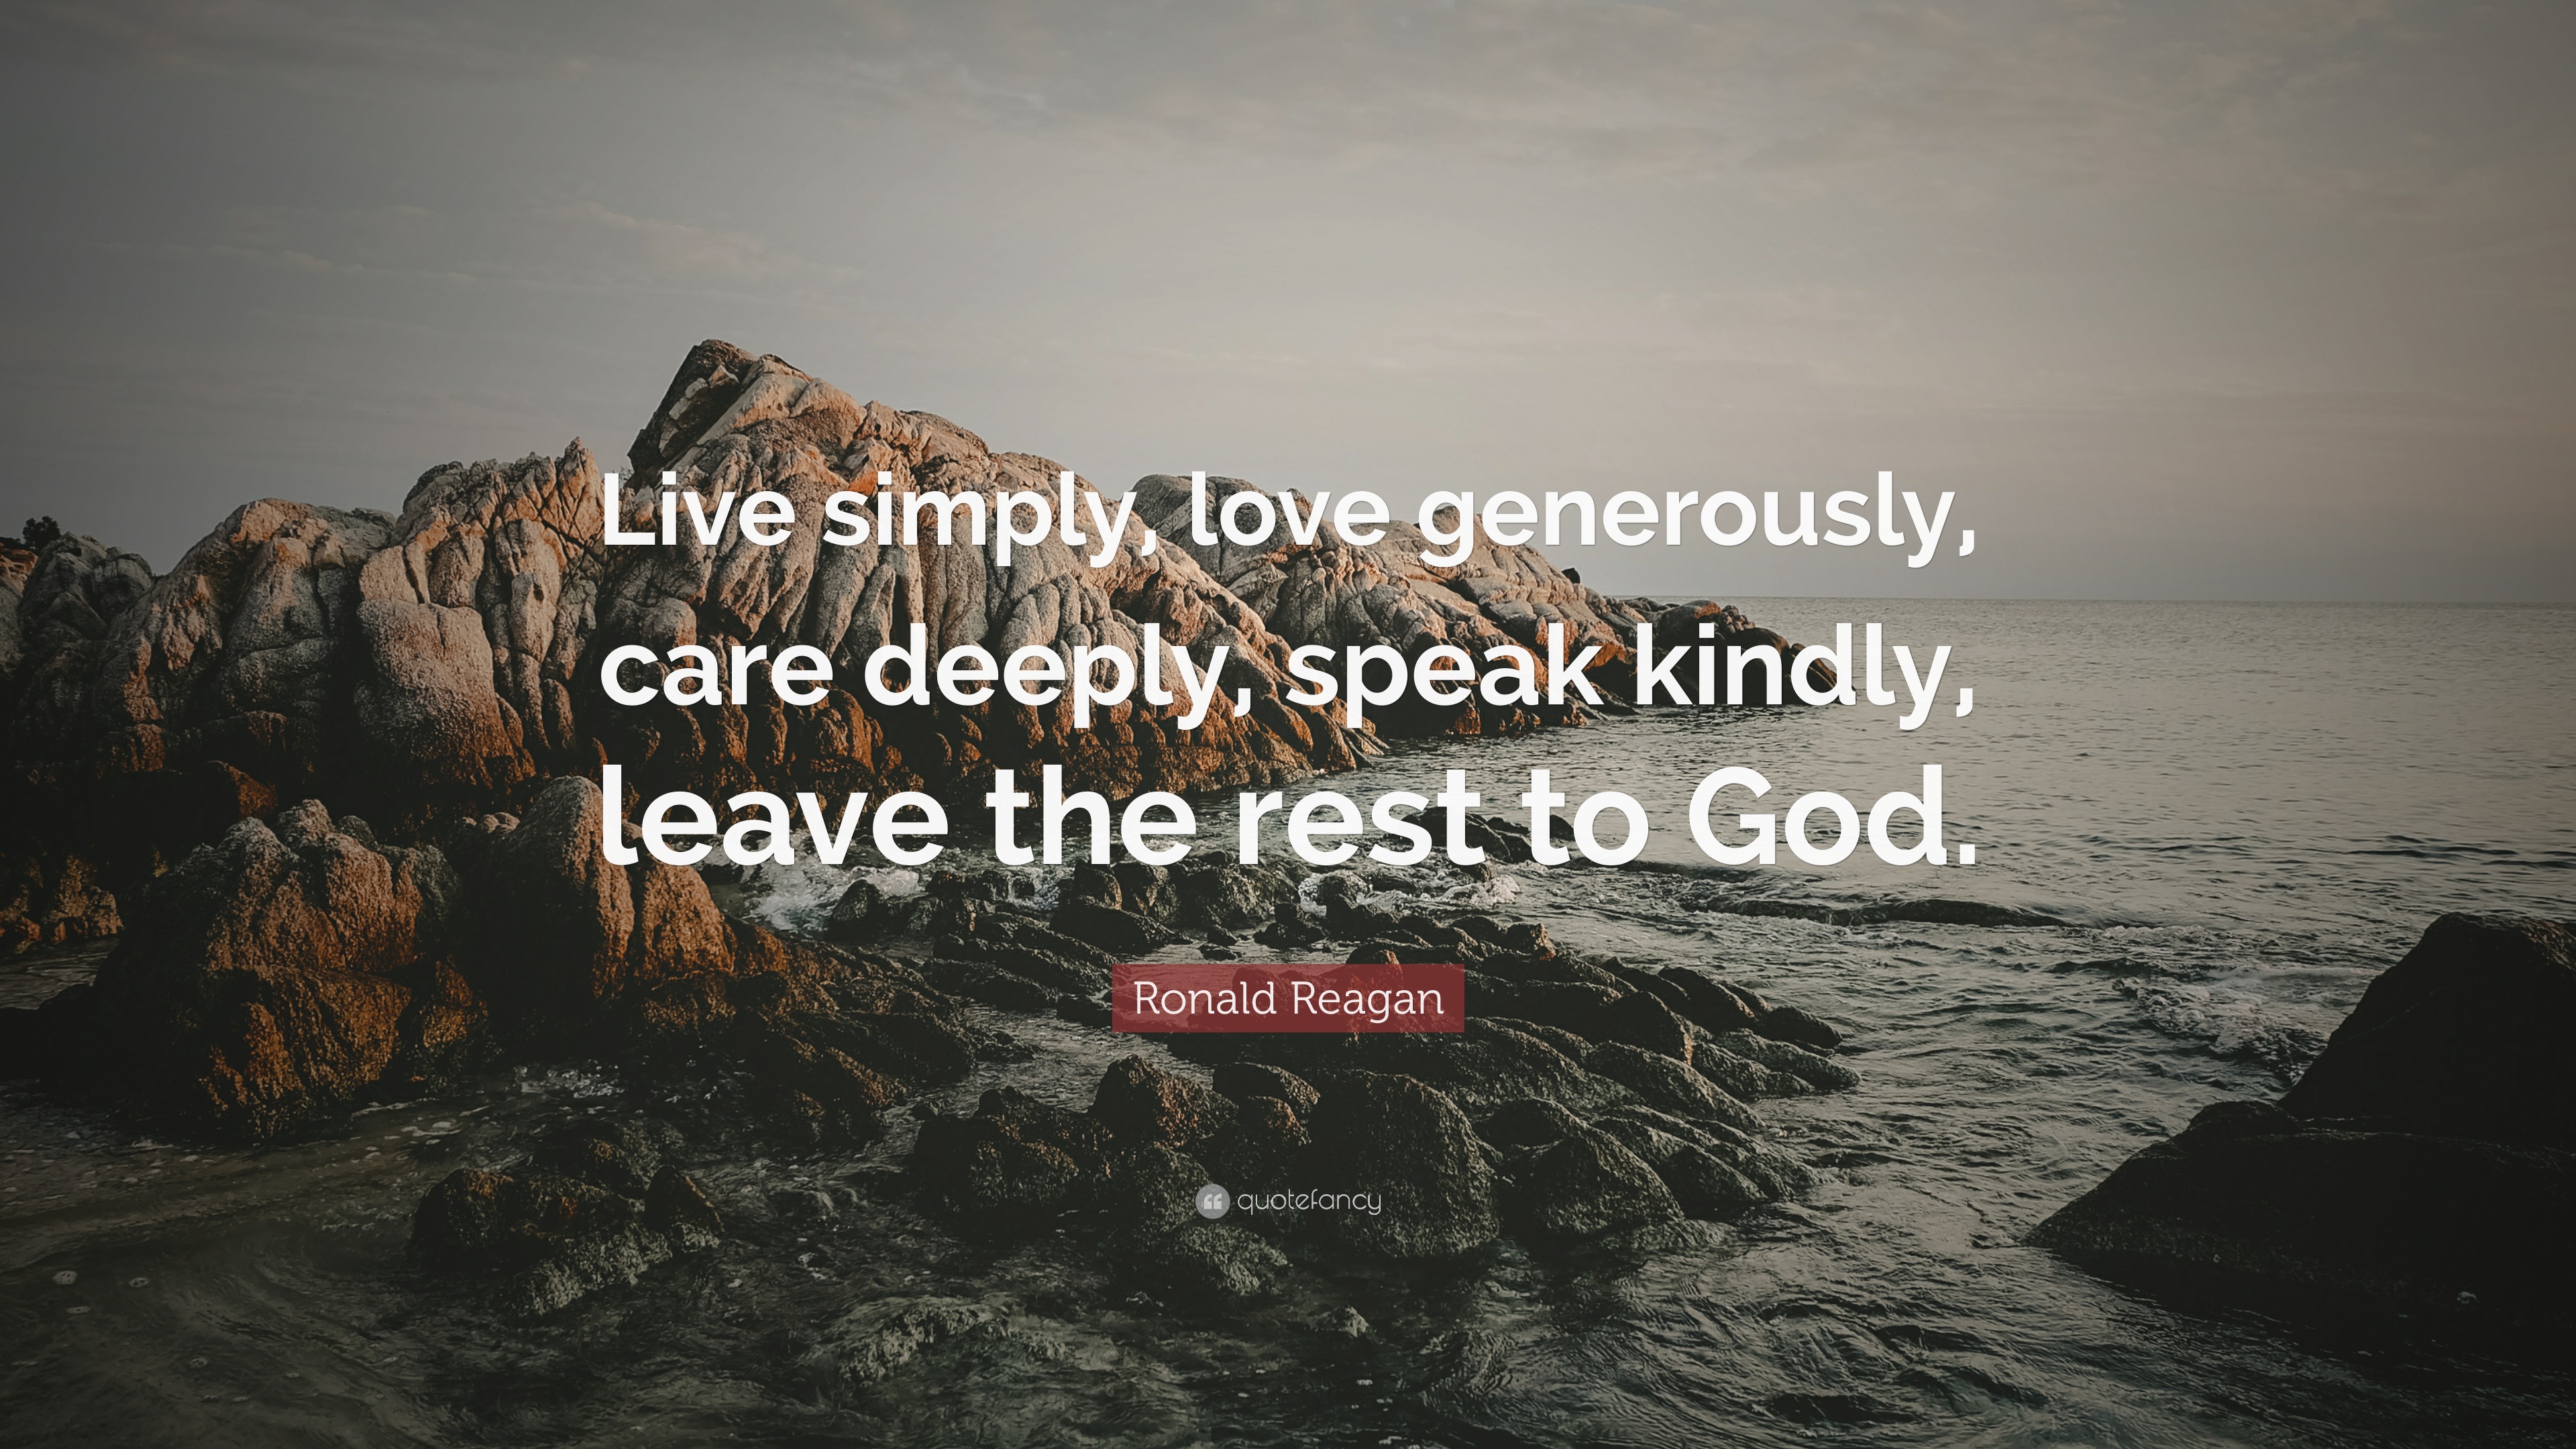 Ronald Reagan Quote: “Live simply, love generously, care deeply, speak ...